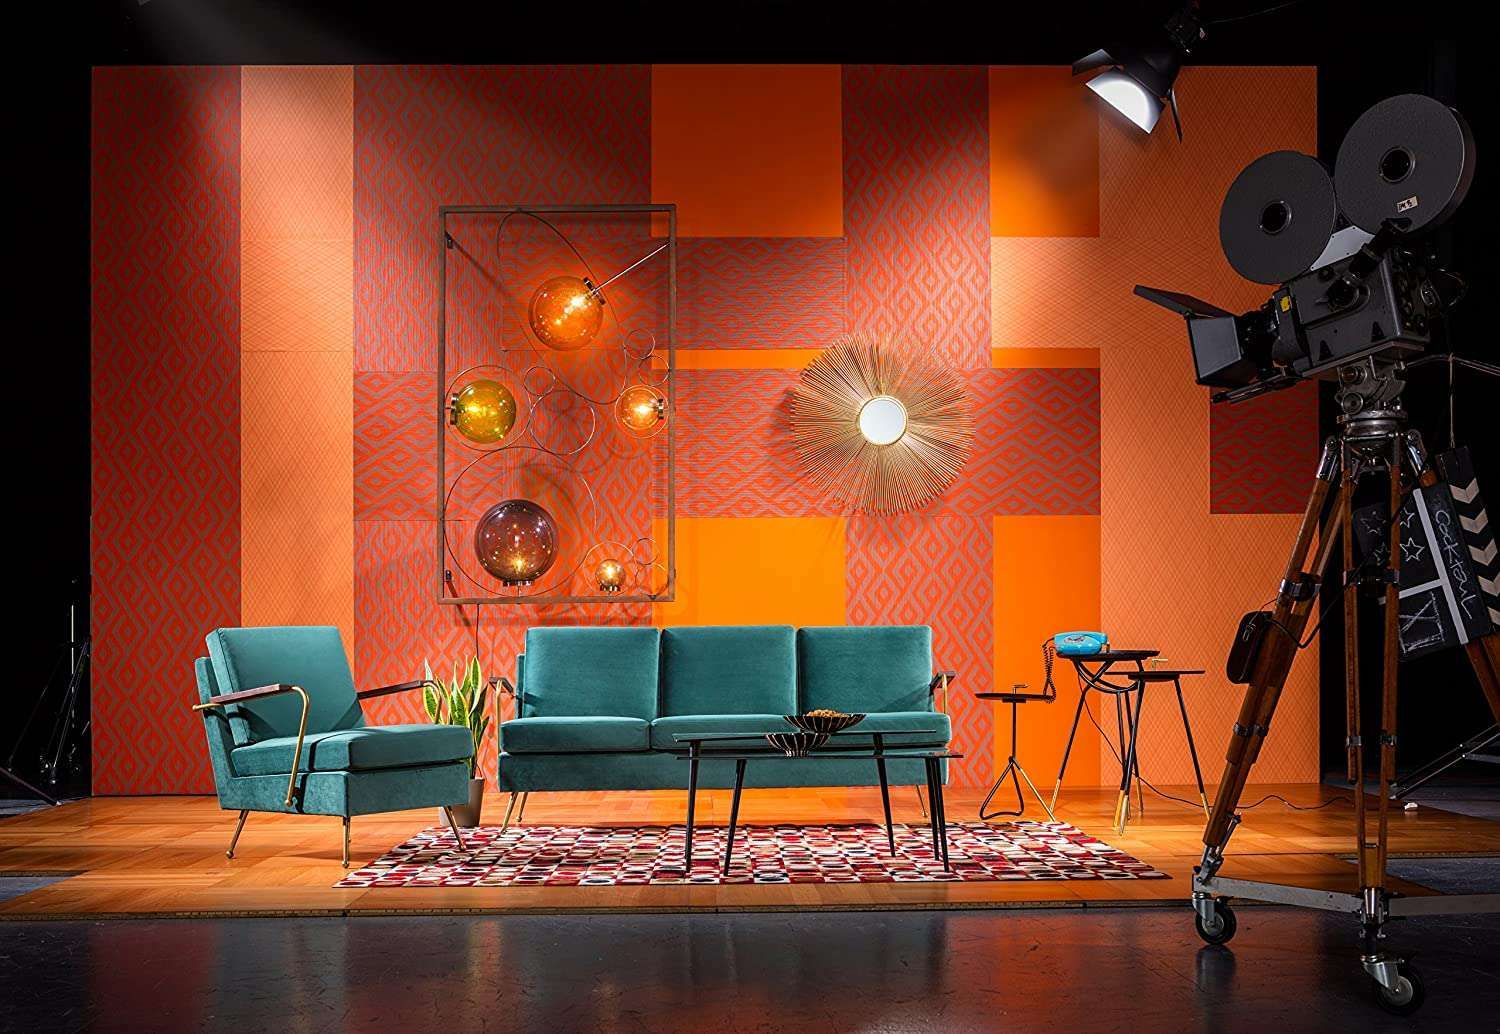 Mirrors Press profile homify Living room Furniture, Couch, Stage is empty, Orange, Chair, Interior design, Entertainment, Tripod, Table, Performing arts